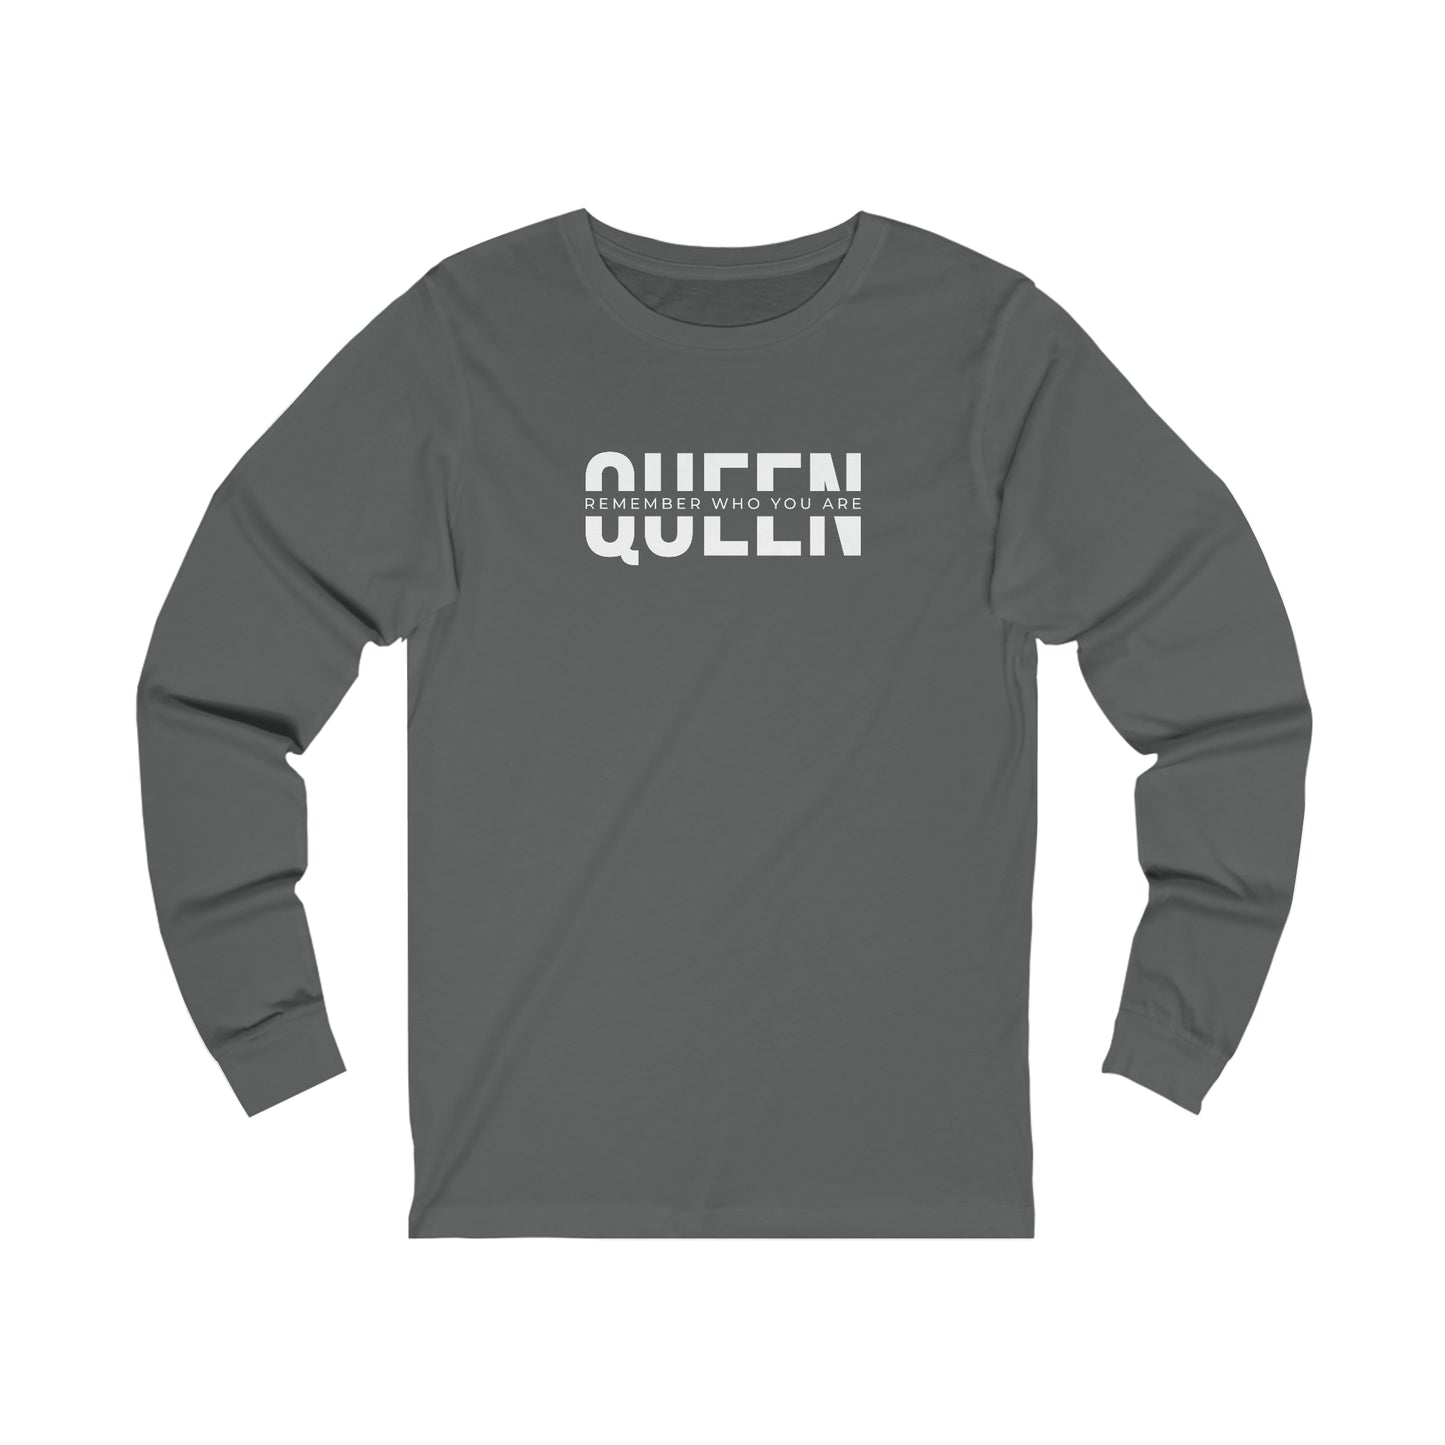 QUEEN: Remember Who You Are (Long Sleeve Tee)